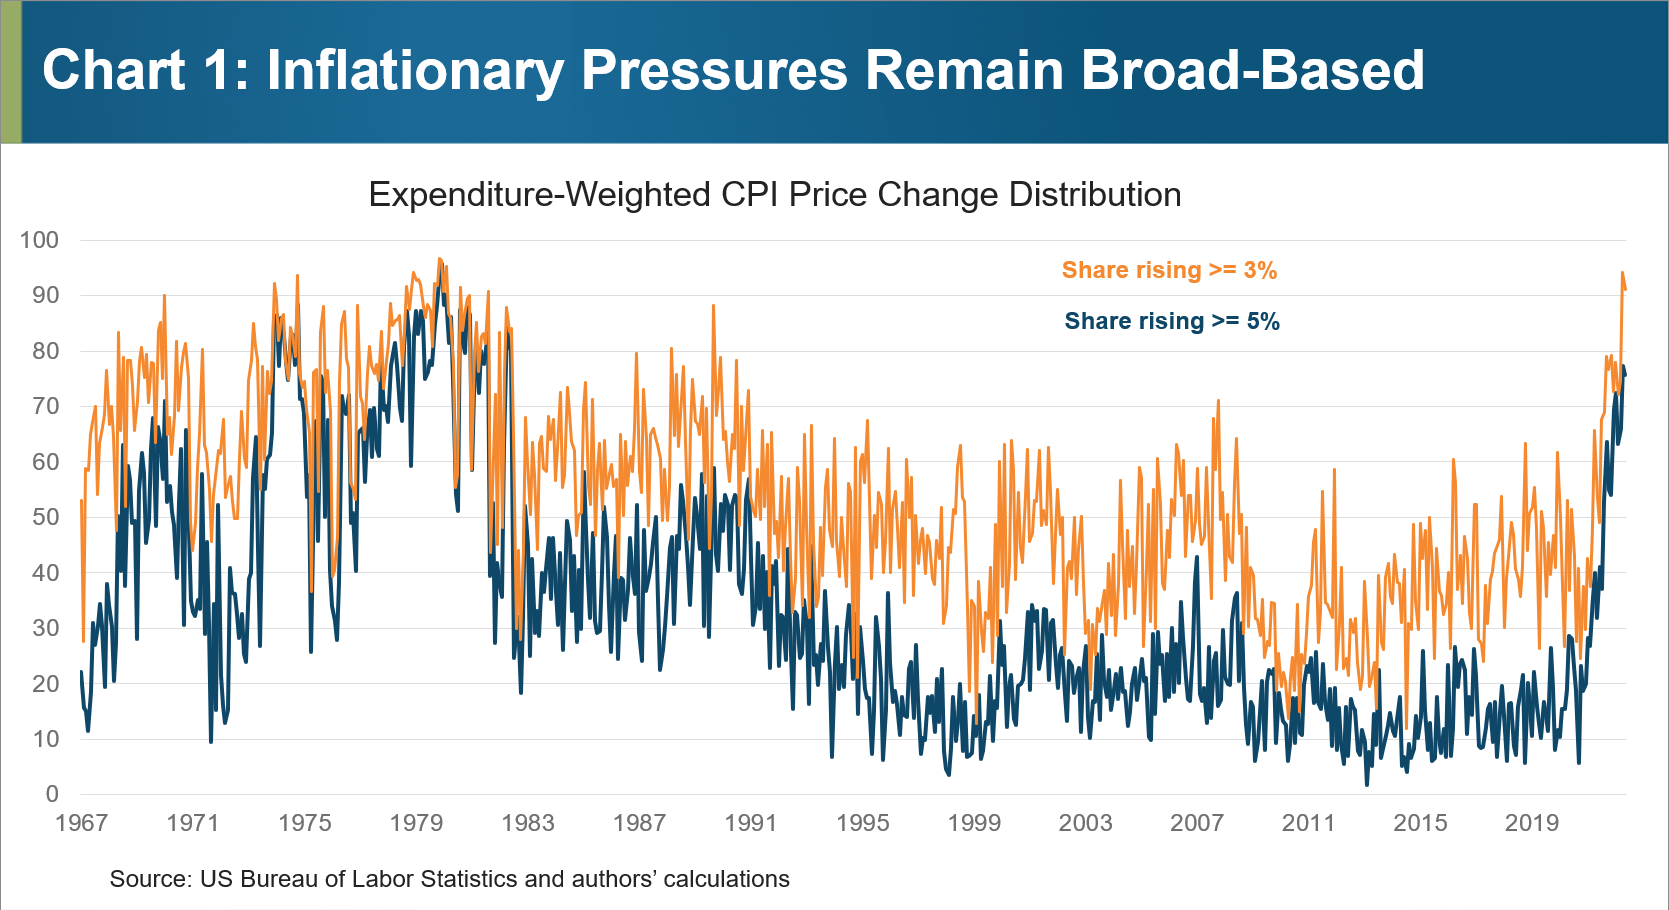 Chart 1 of 4: Inflationary Pressures Remain Broad-Based